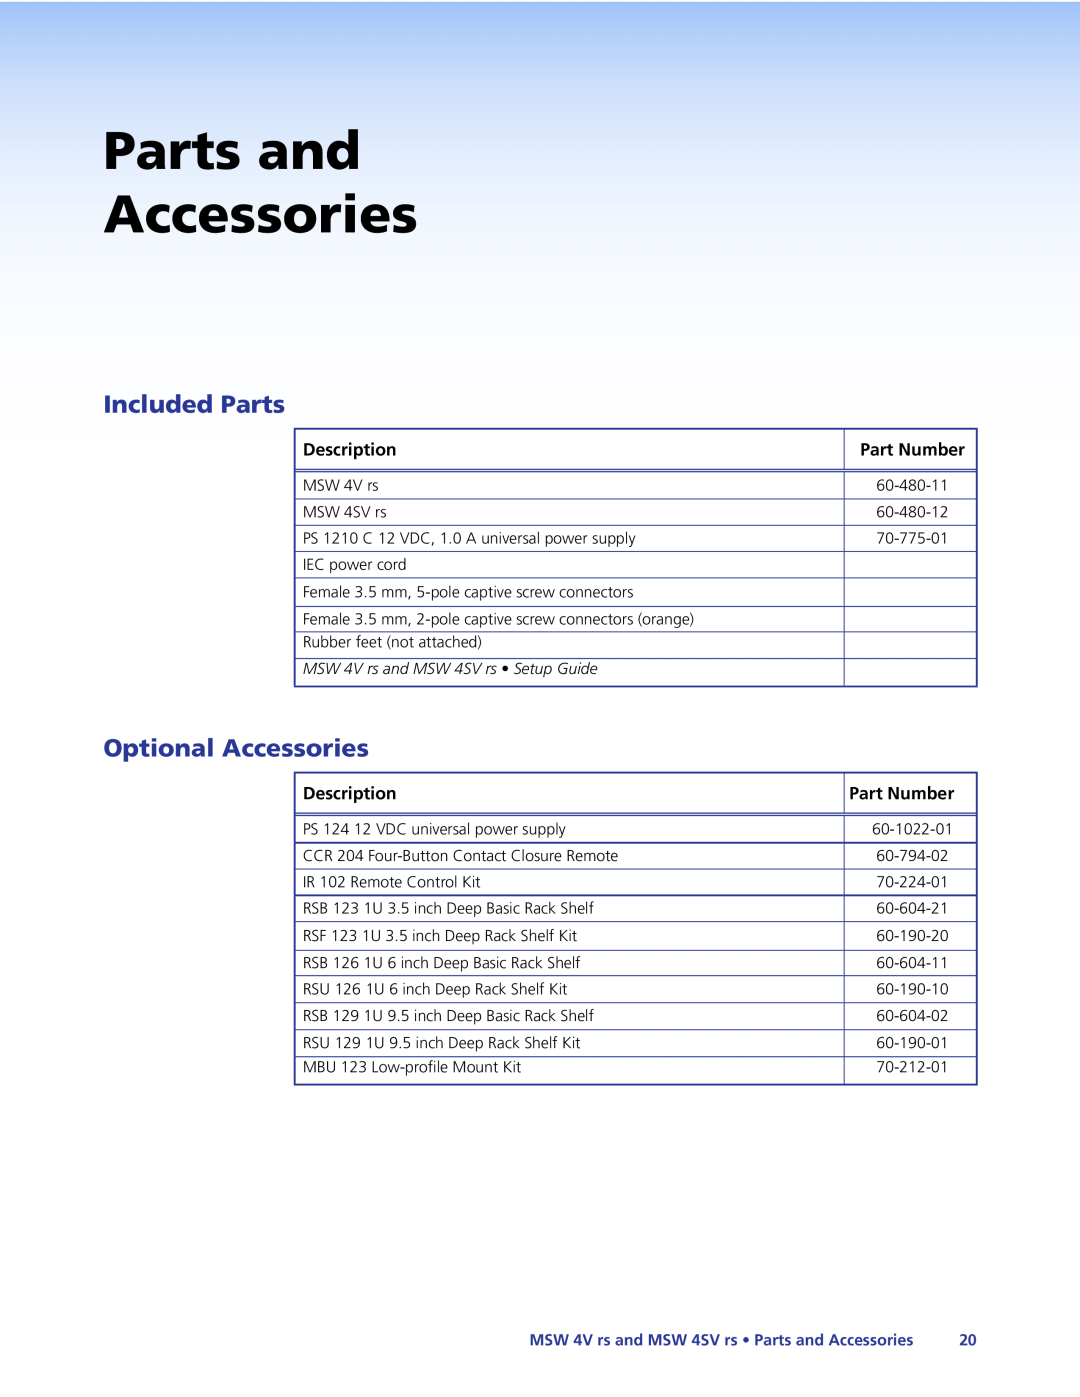 Extron electronic MSW 4V rs manual Parts and Accessories, Included Parts, Optional Accessories, Description, Part Number 